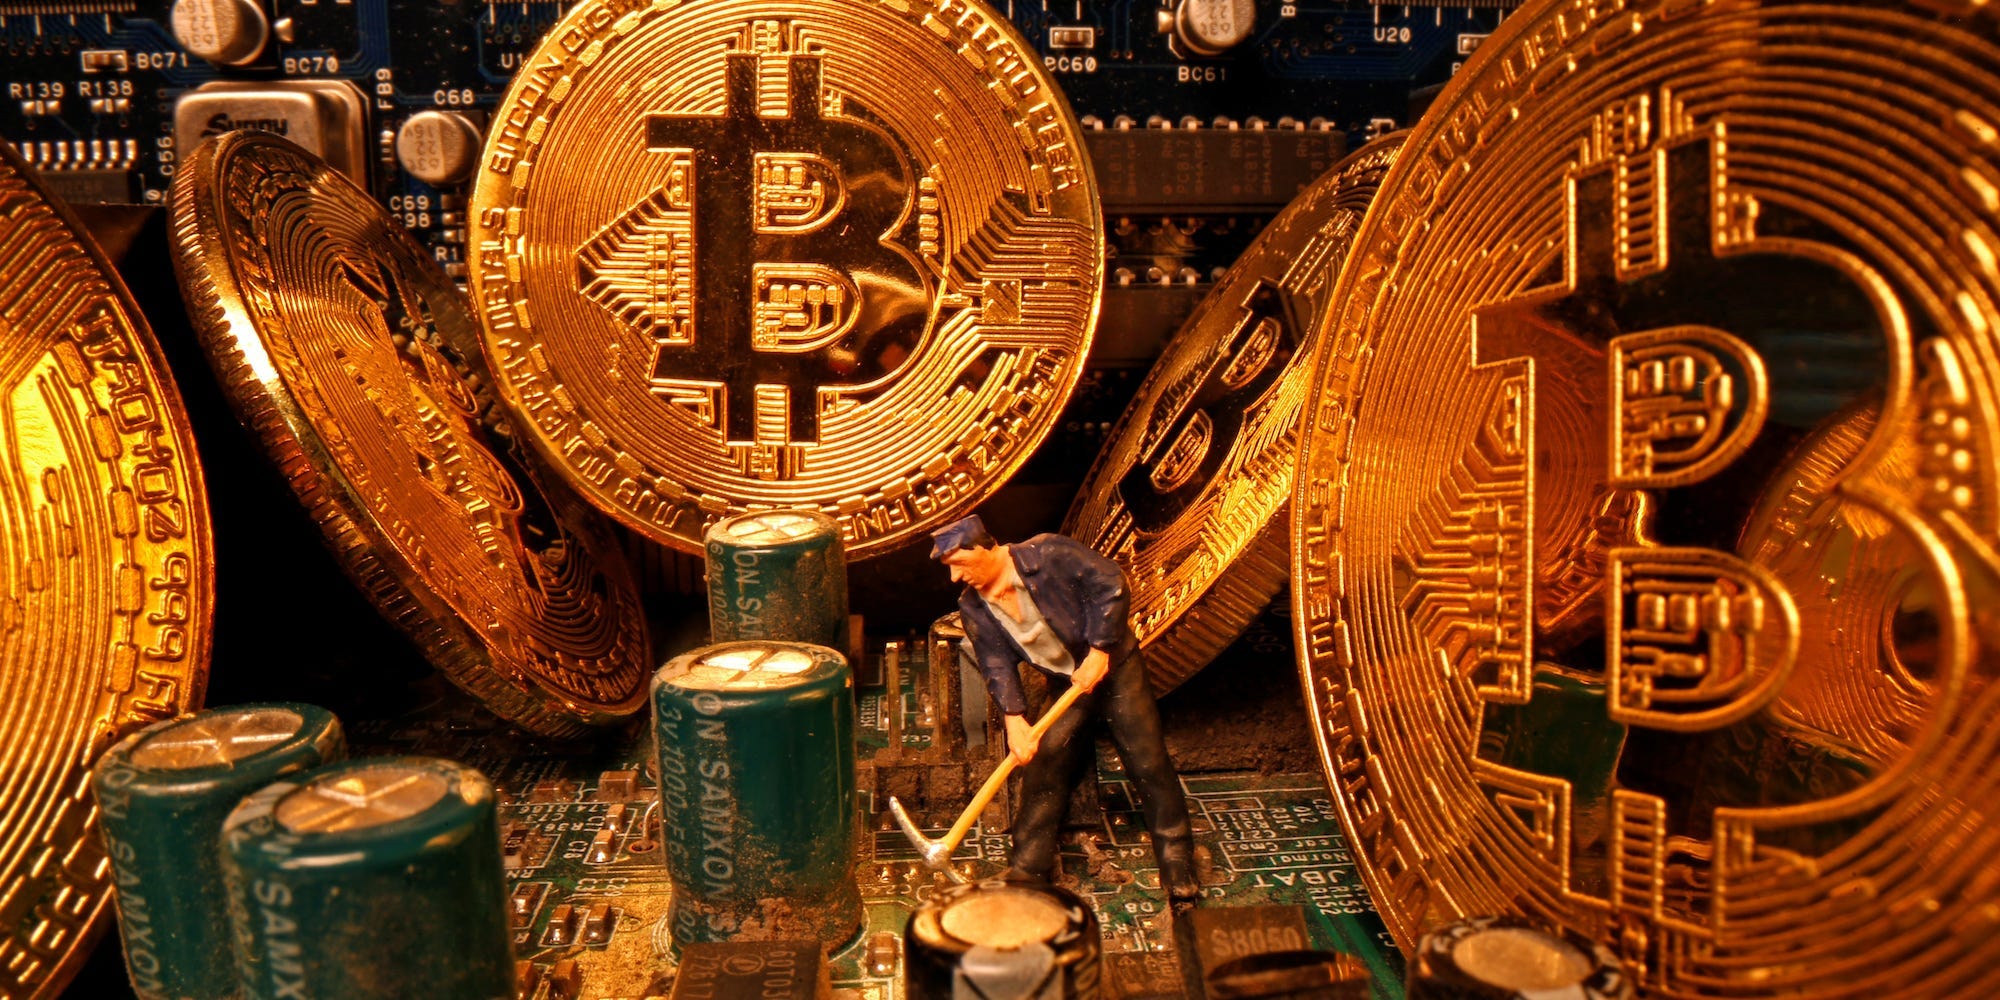 Bitcoin has ‘considerable’ upside as it better competes with gold as alternative currency, JPMorgan says | Currency News | Financial and Business News | Markets Insider – Business Insider